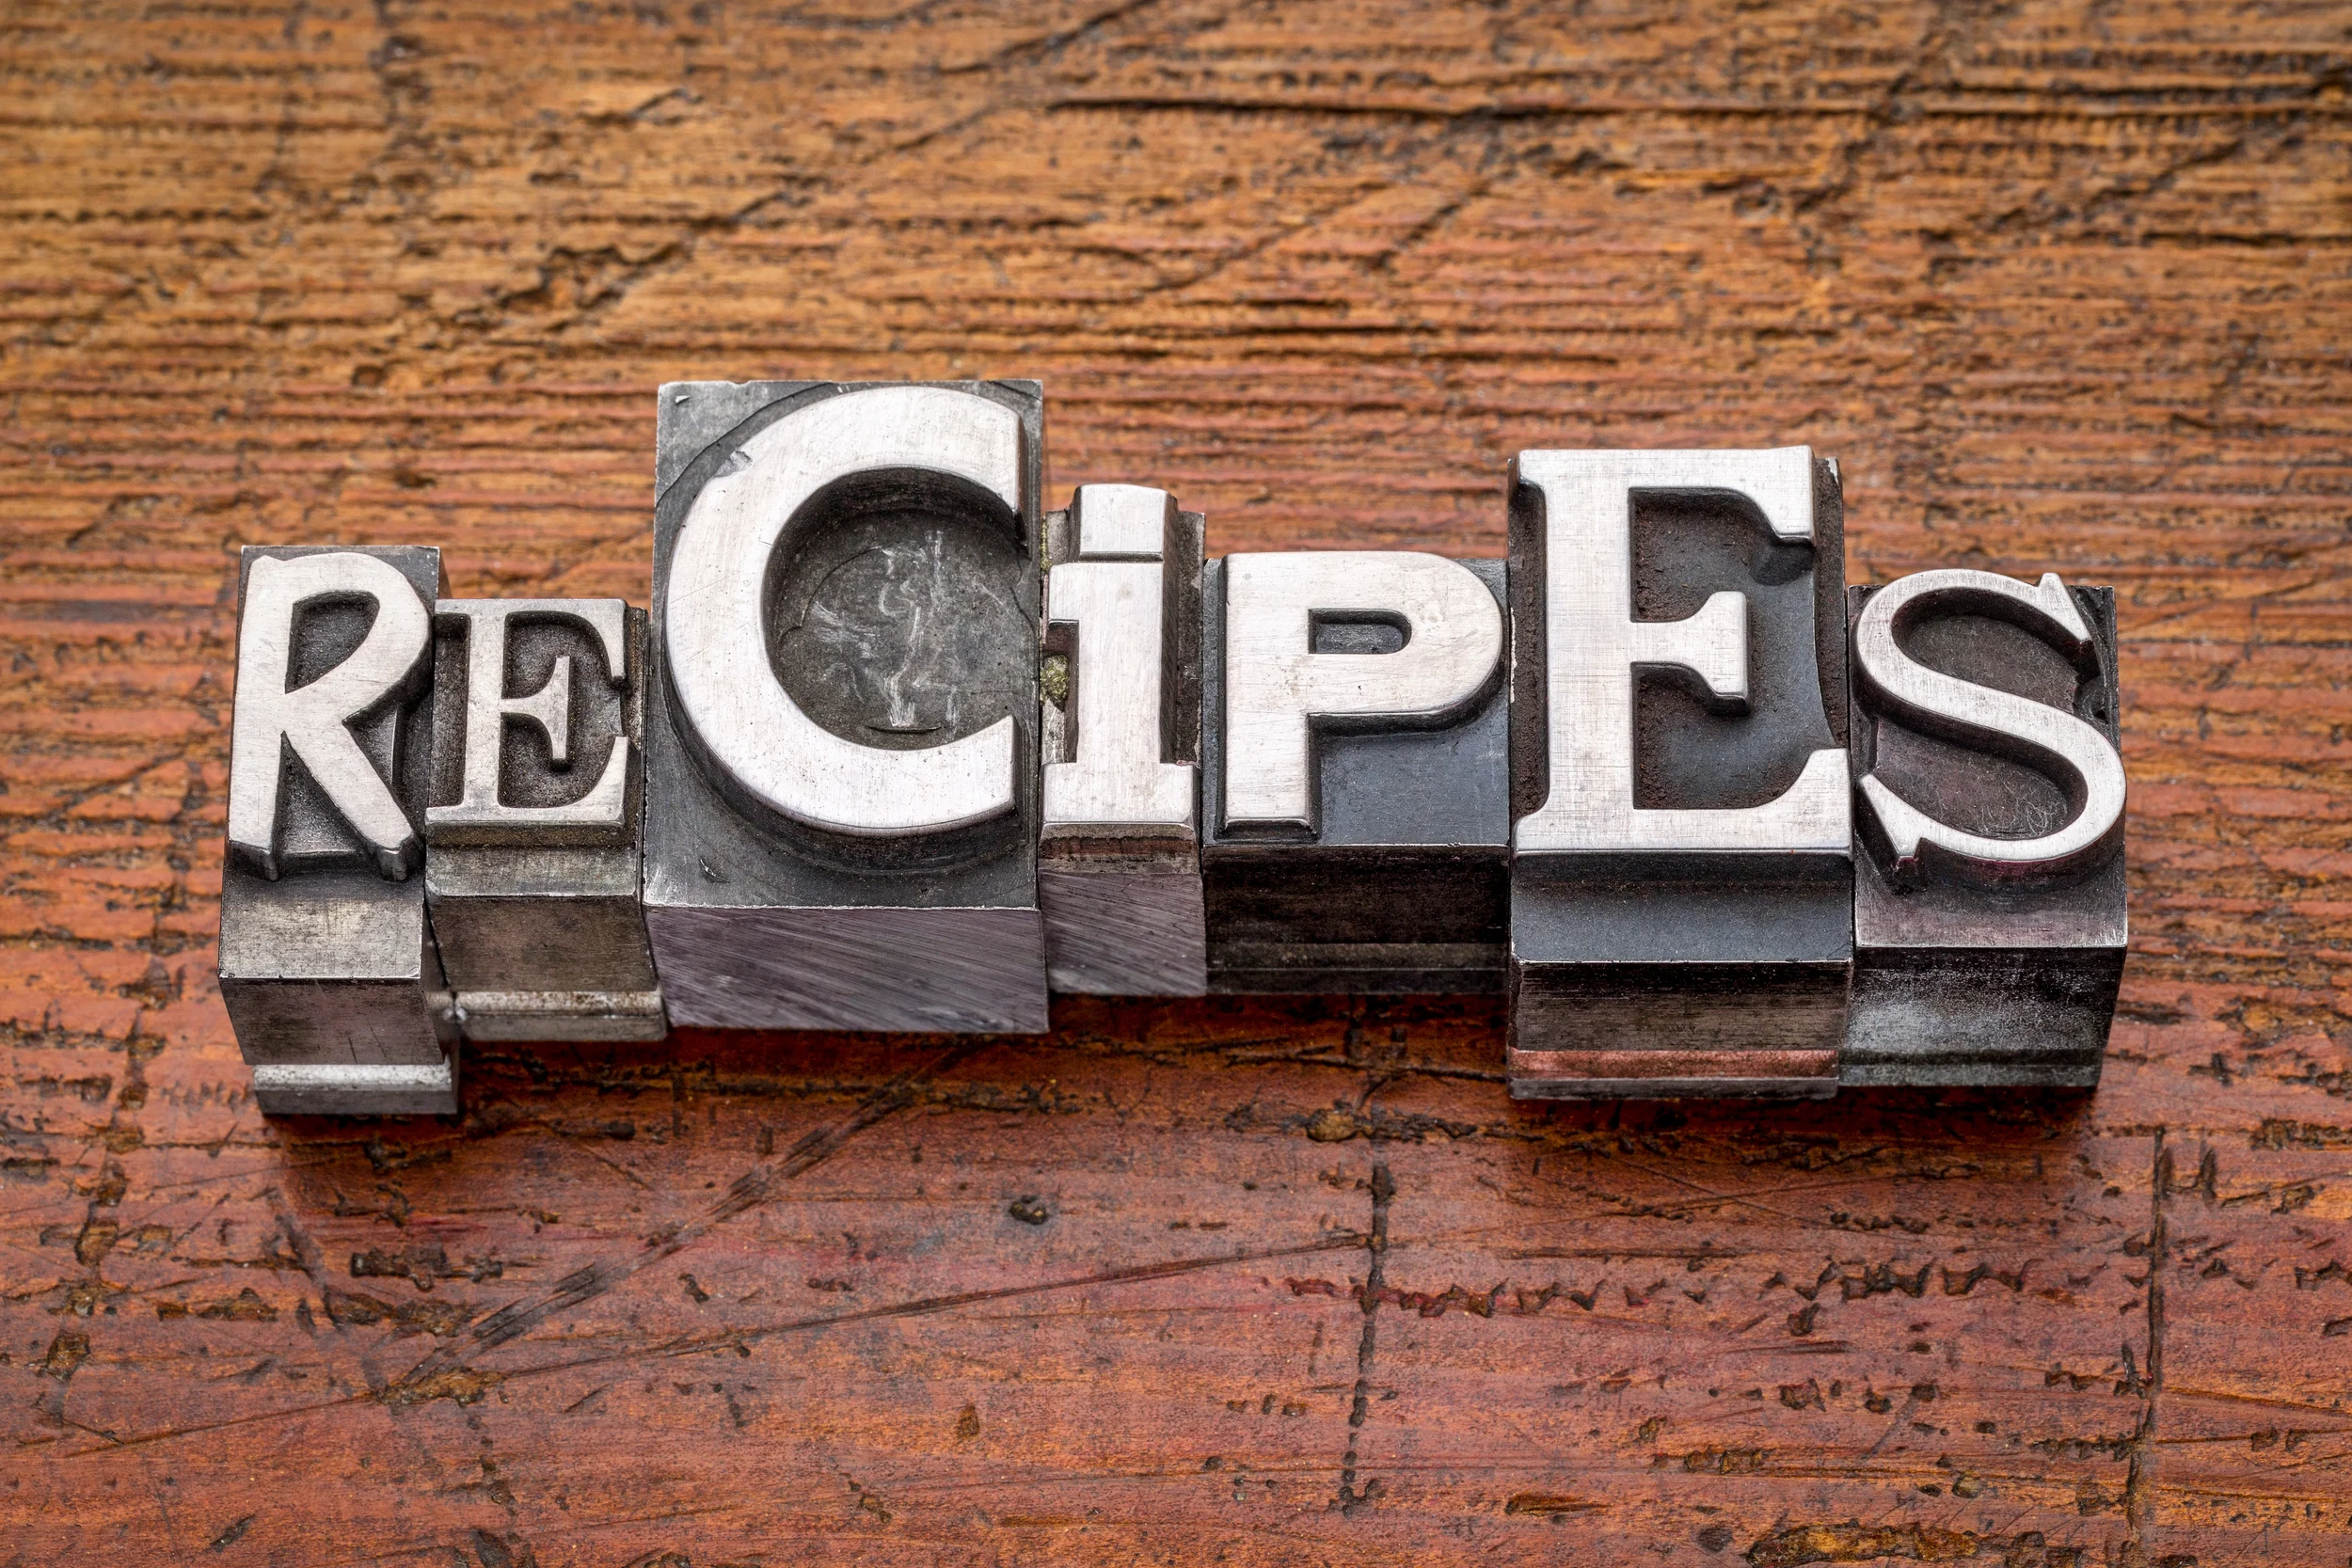 The word 'Recipes' in typeset